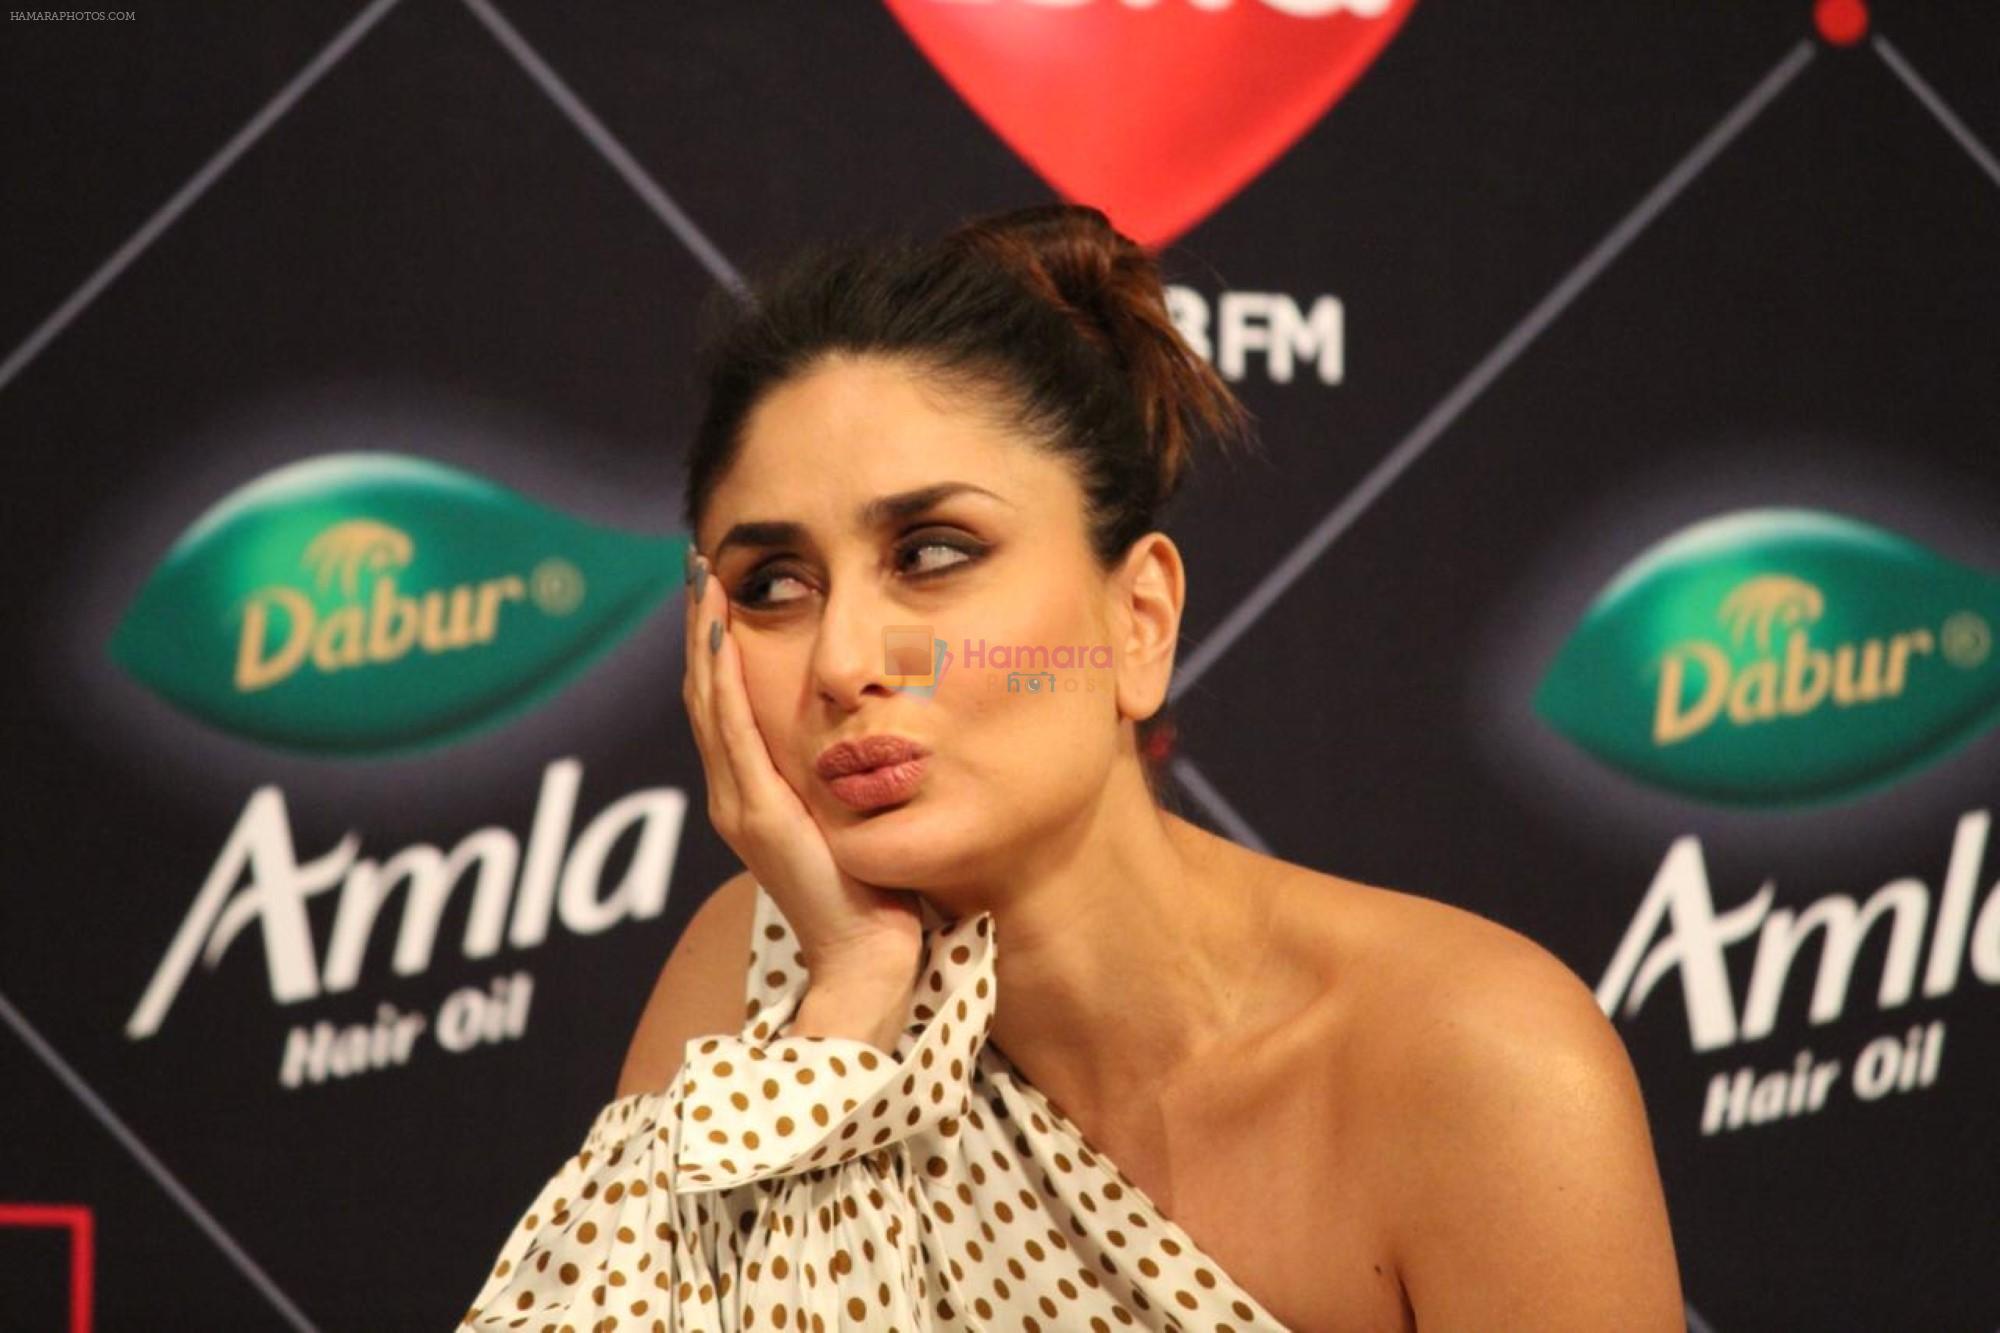 Kareena Kapoor at the Launch of Ishq 104.8 FM Upcoming Show What Women Want on 20th Nov 2018